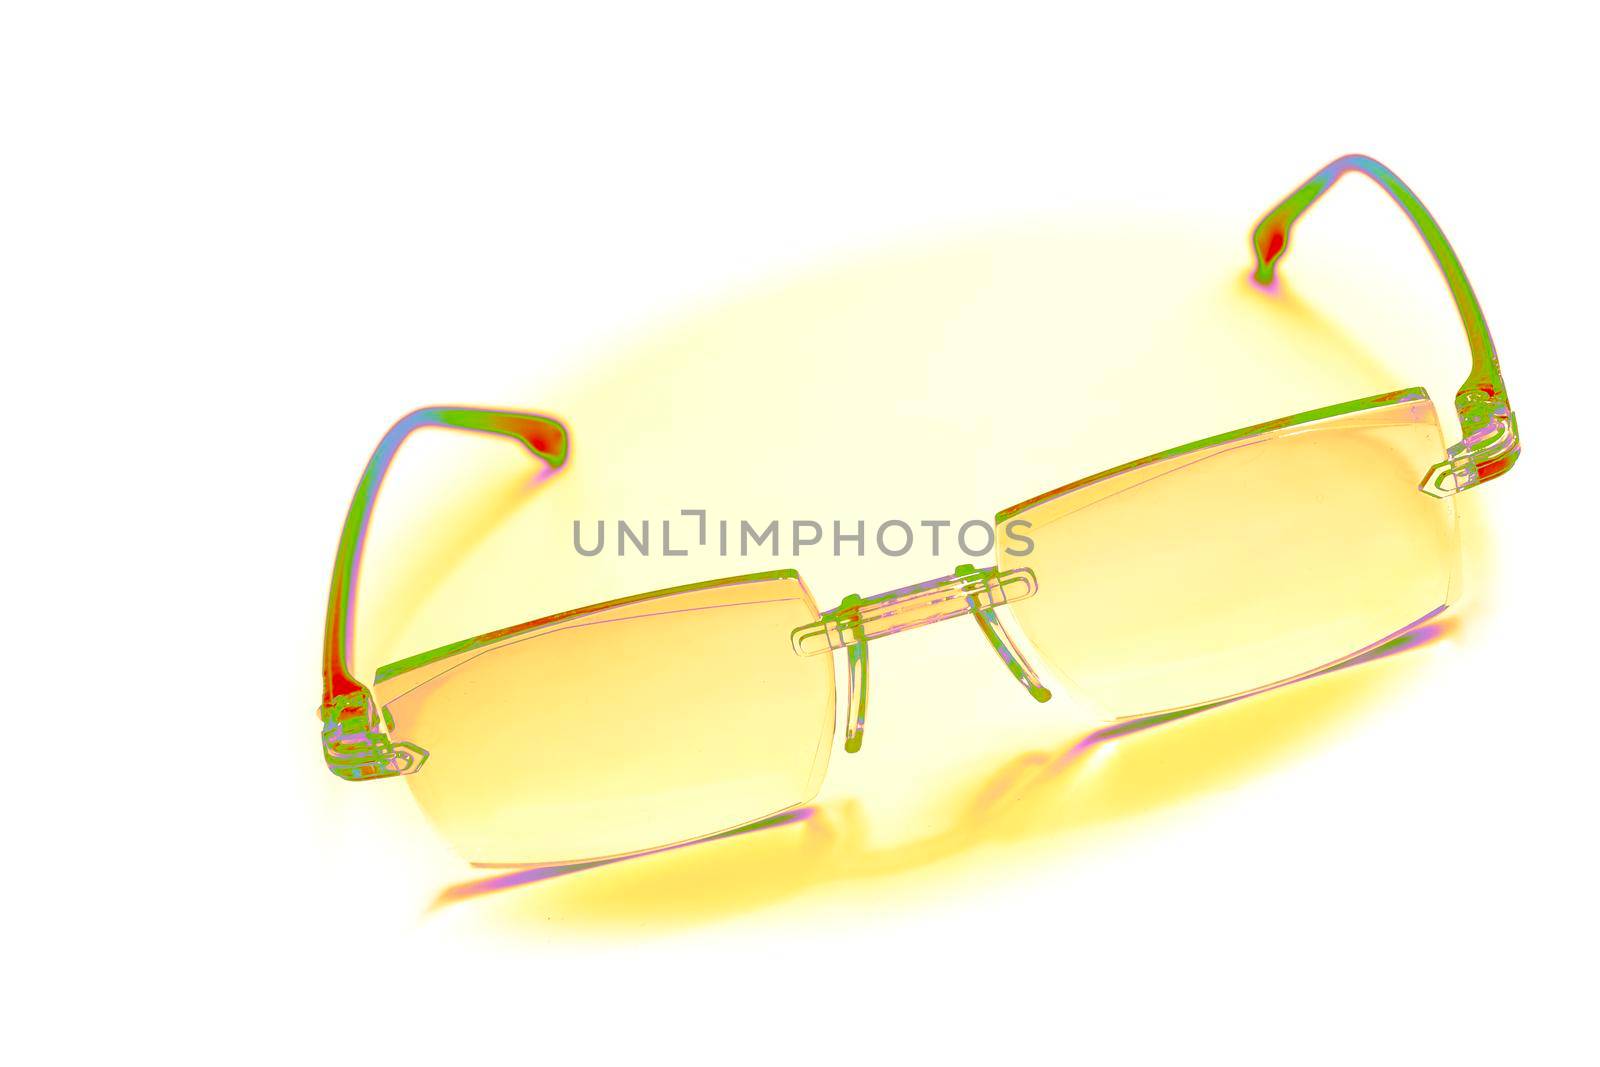 a pair of lenses set in a frame resting on the nose and ears, used to correct or assist defective eyesight or protect the eyes.